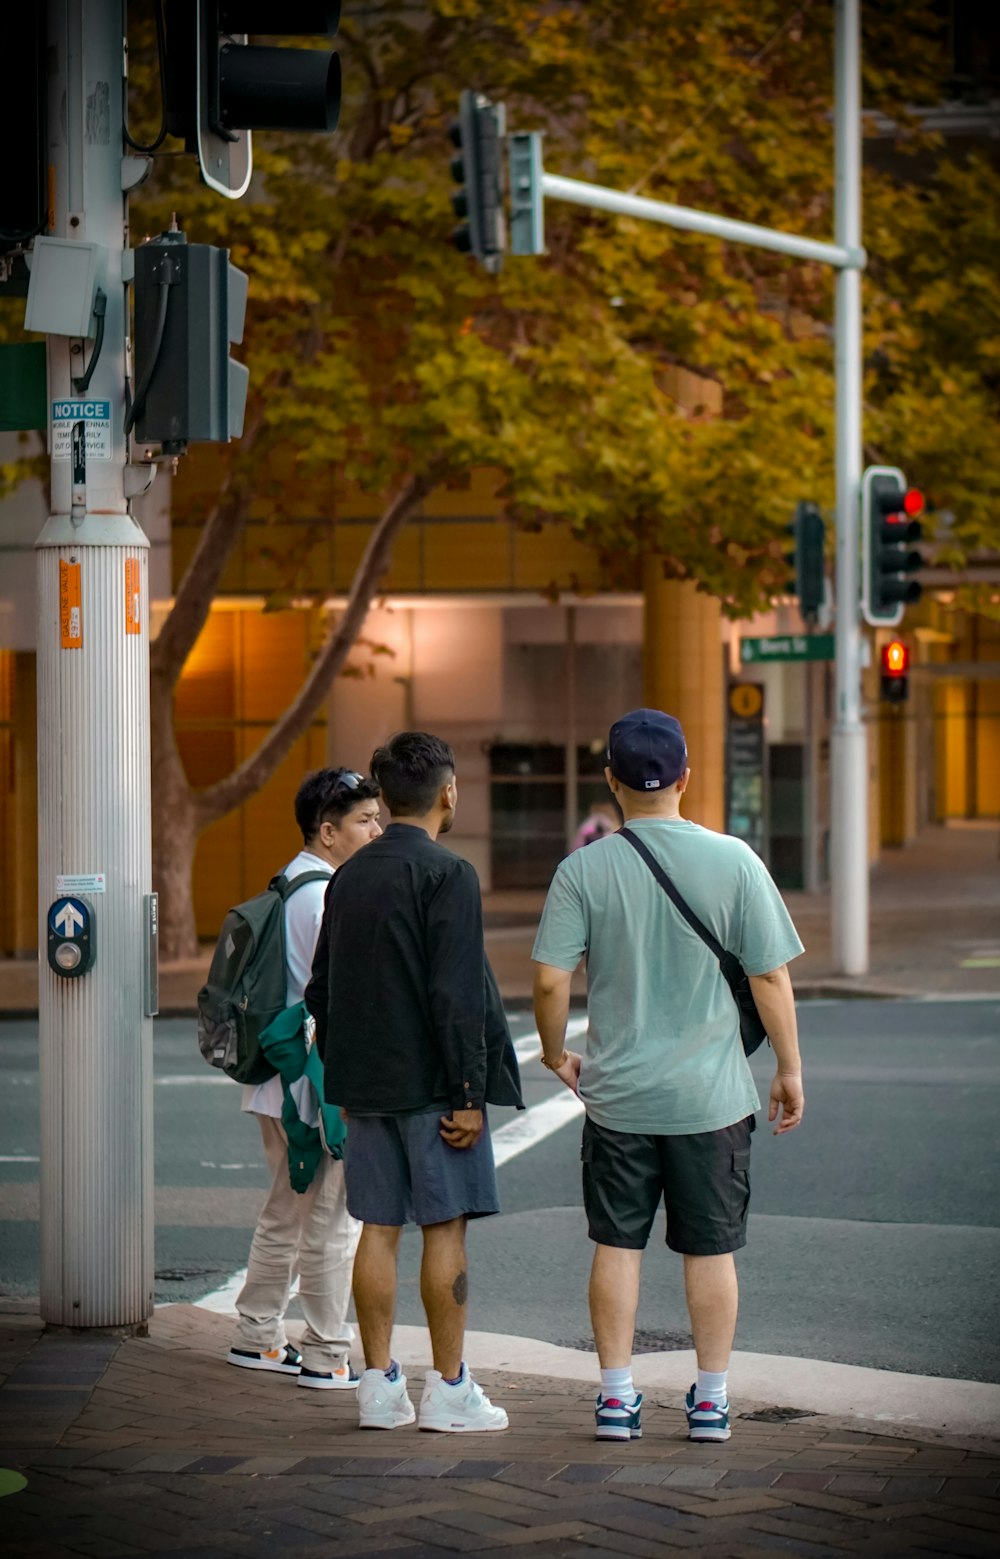 a group of people waiting at a cross walk